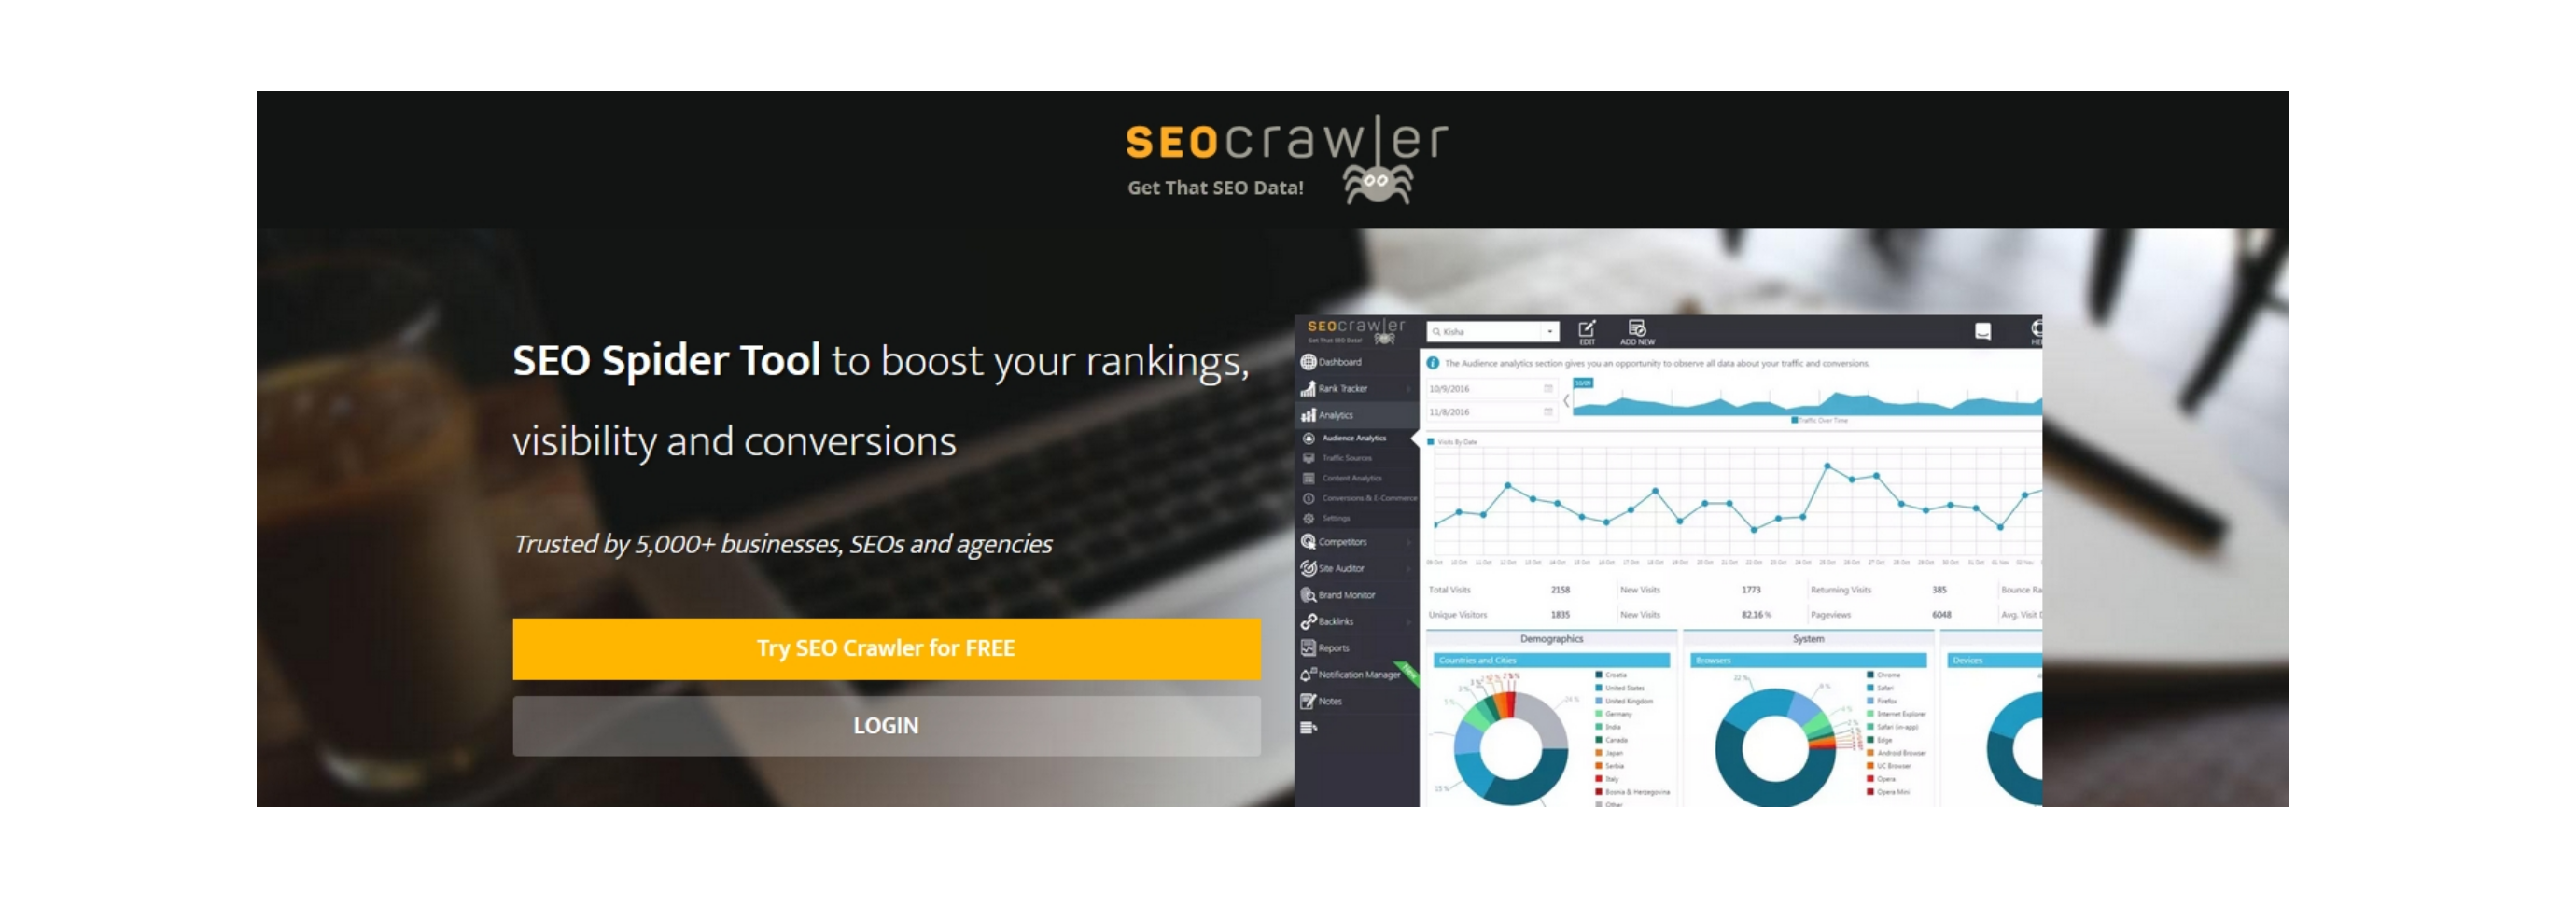 SEO Spider Tool to boost your rankings, visibility and conversions